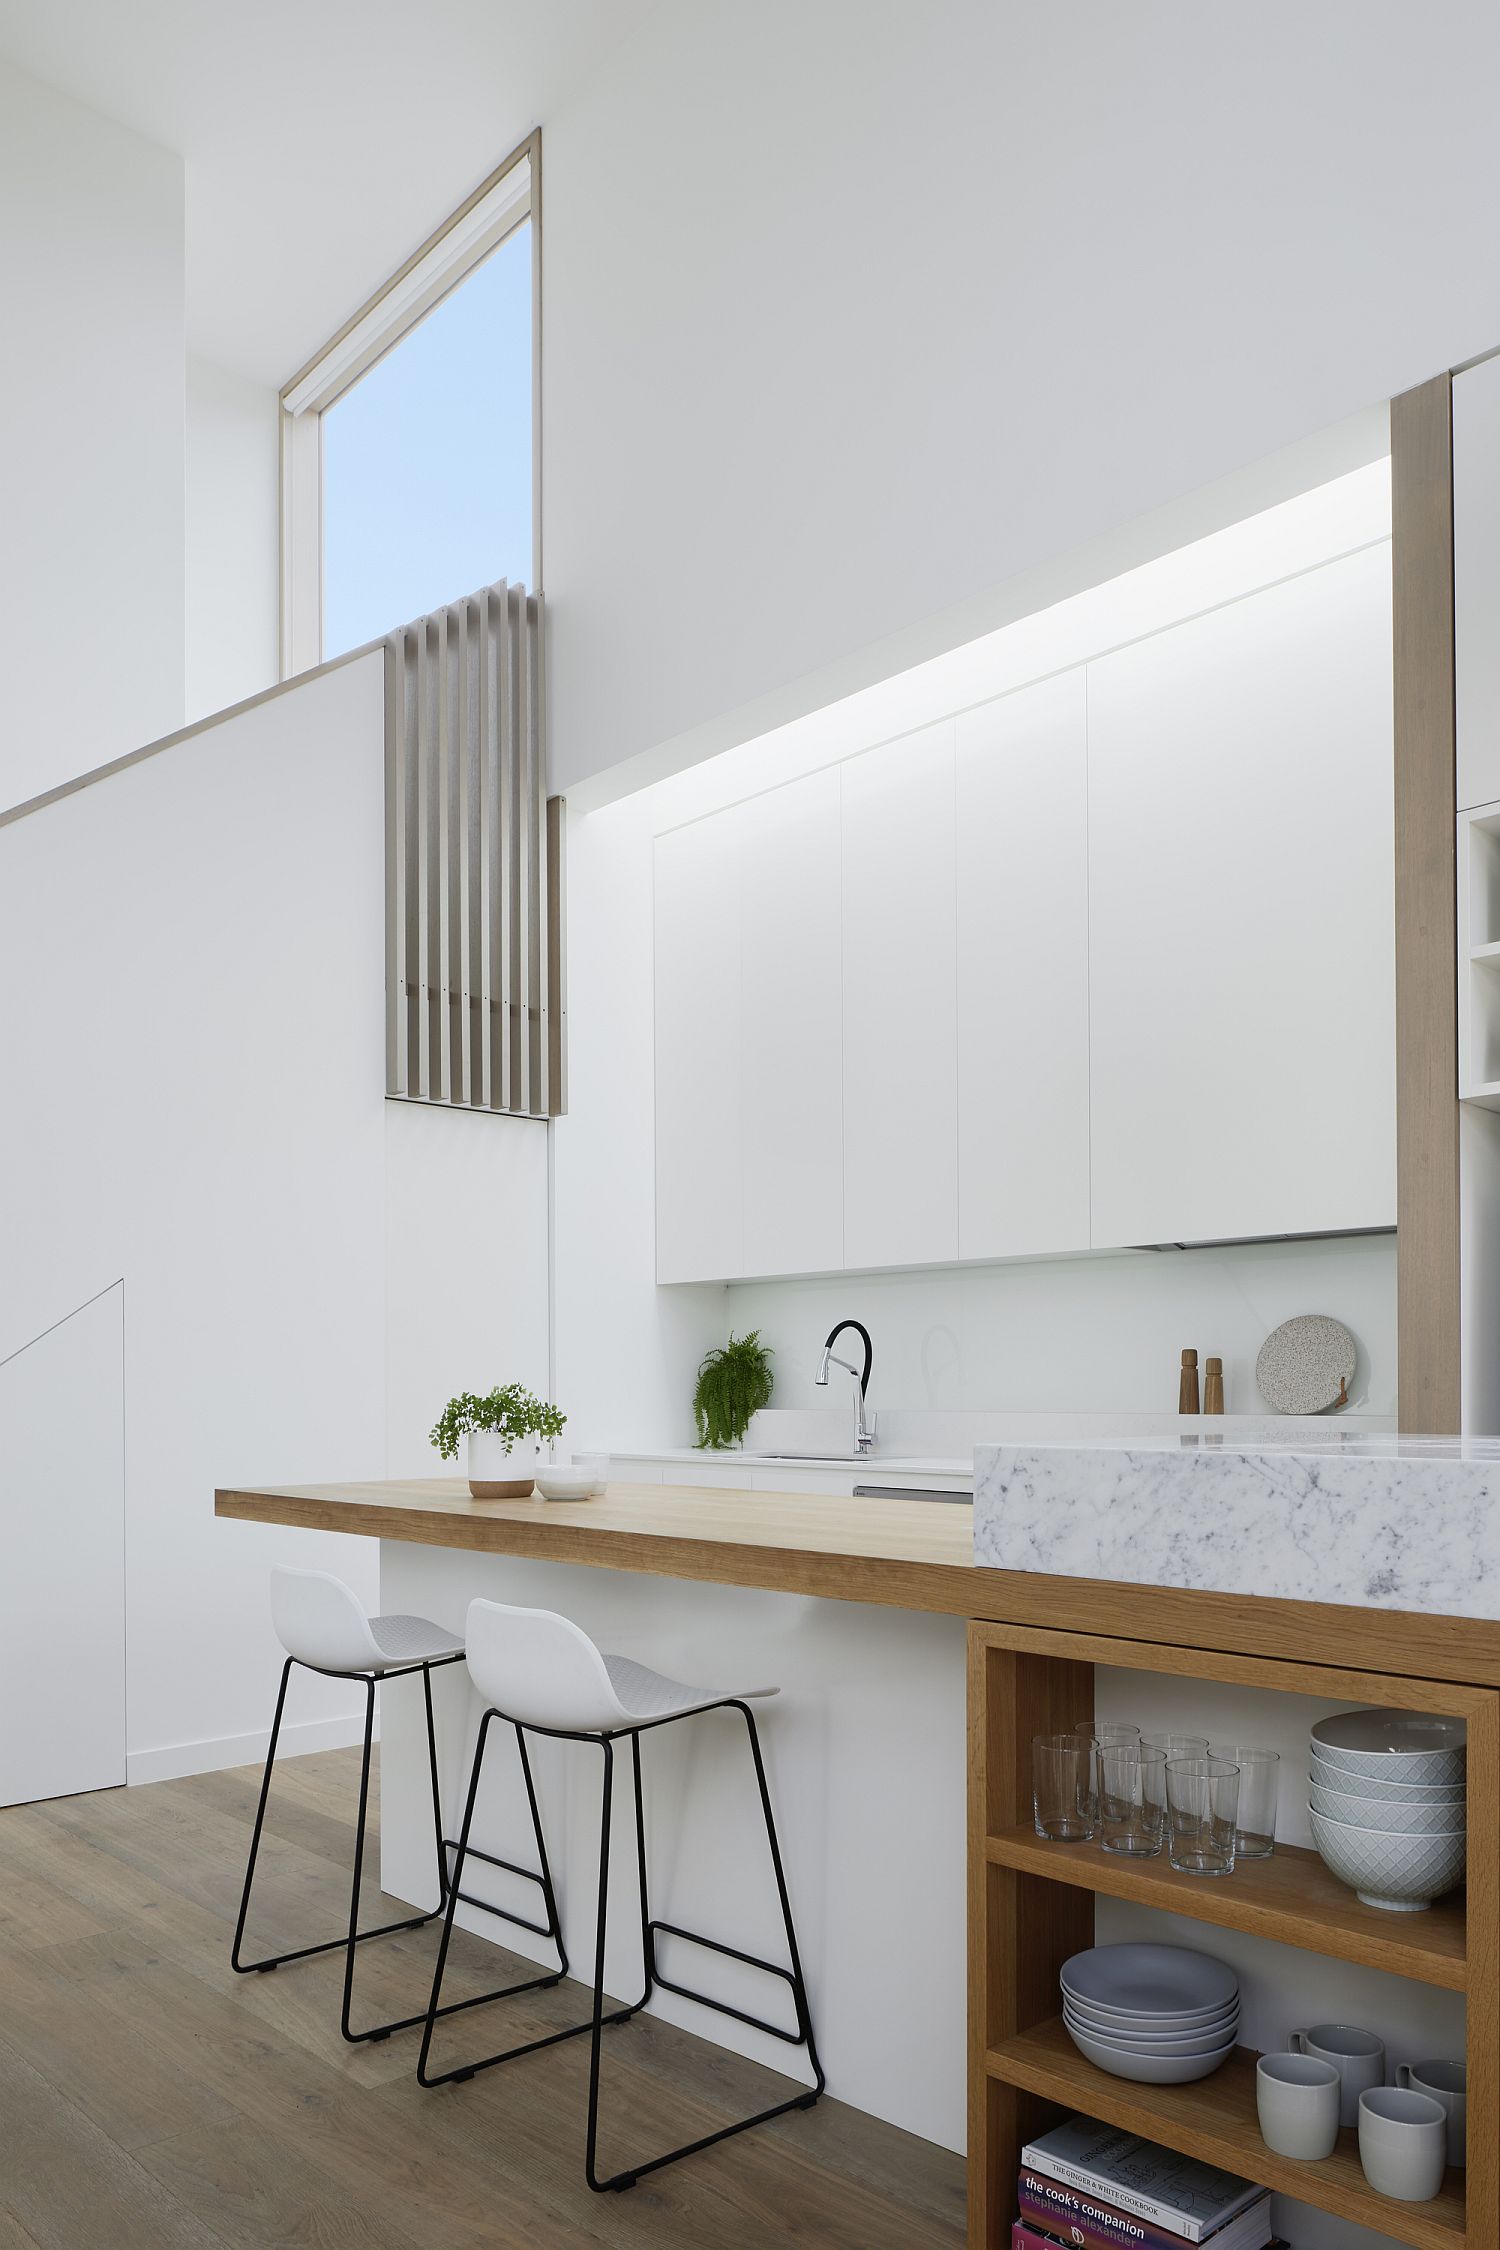 Polished modern kitchen in white and wood